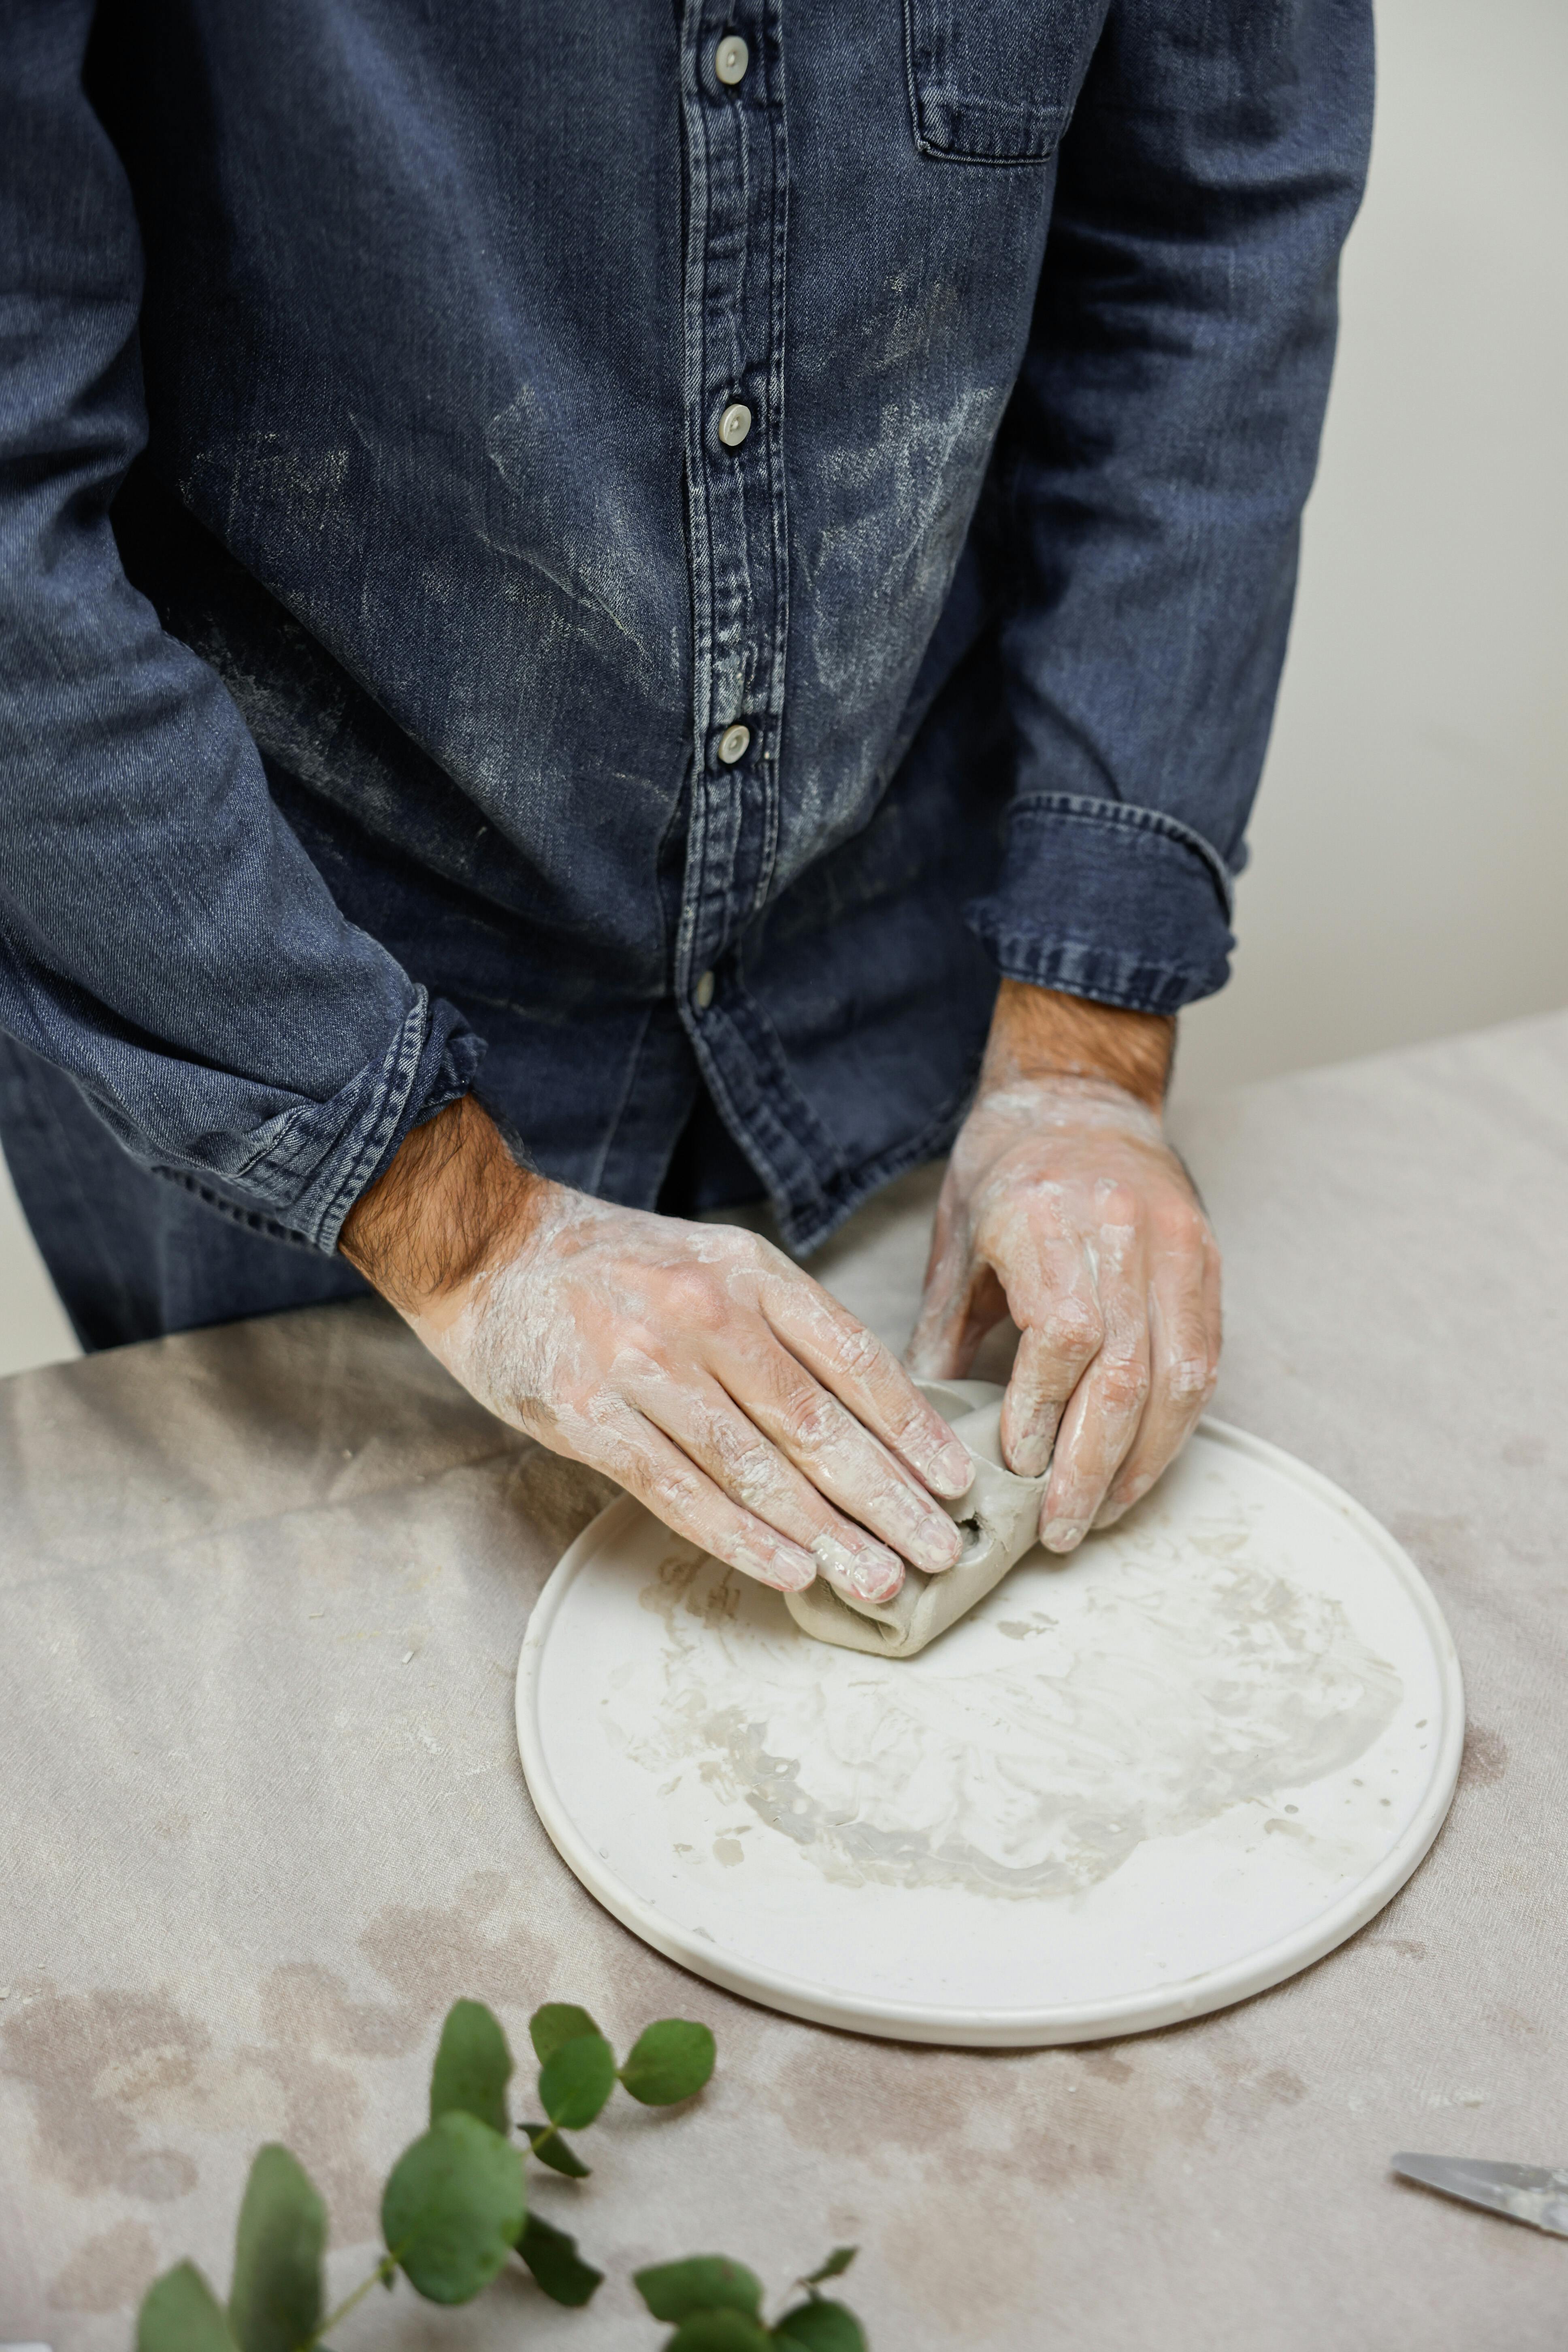 Hands of a Person Molding Clay · Free Stock Photo